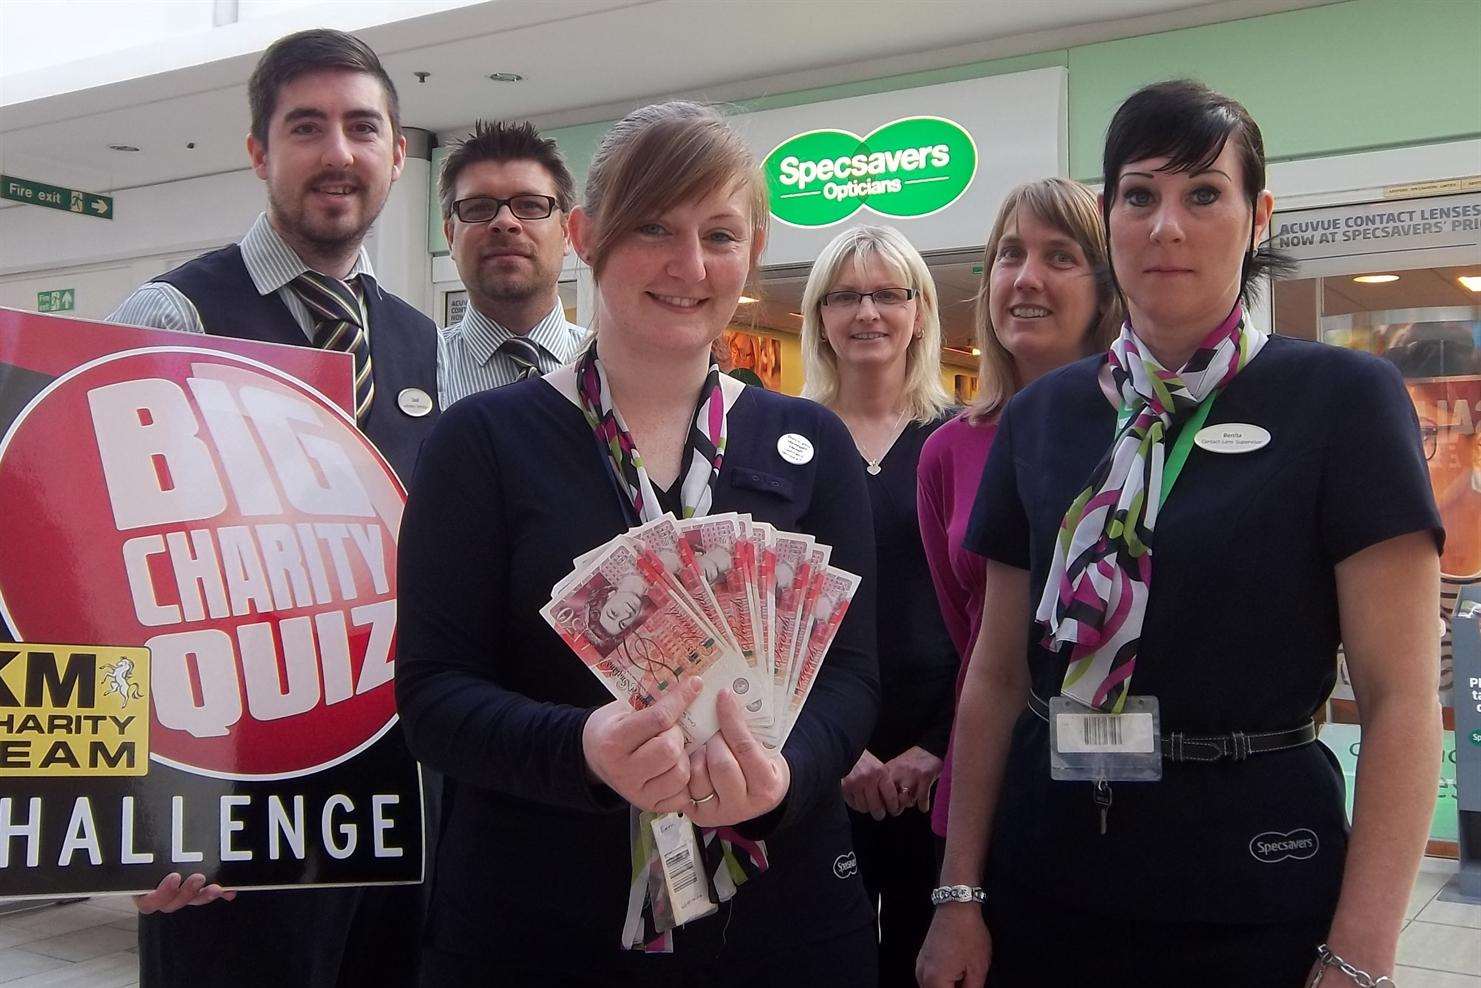 Specsavers store members from Ashford showing off the £500 which could be won at the KM Big Charity Quiz by one lucky person selected on the night to answer an on the spot quiz question